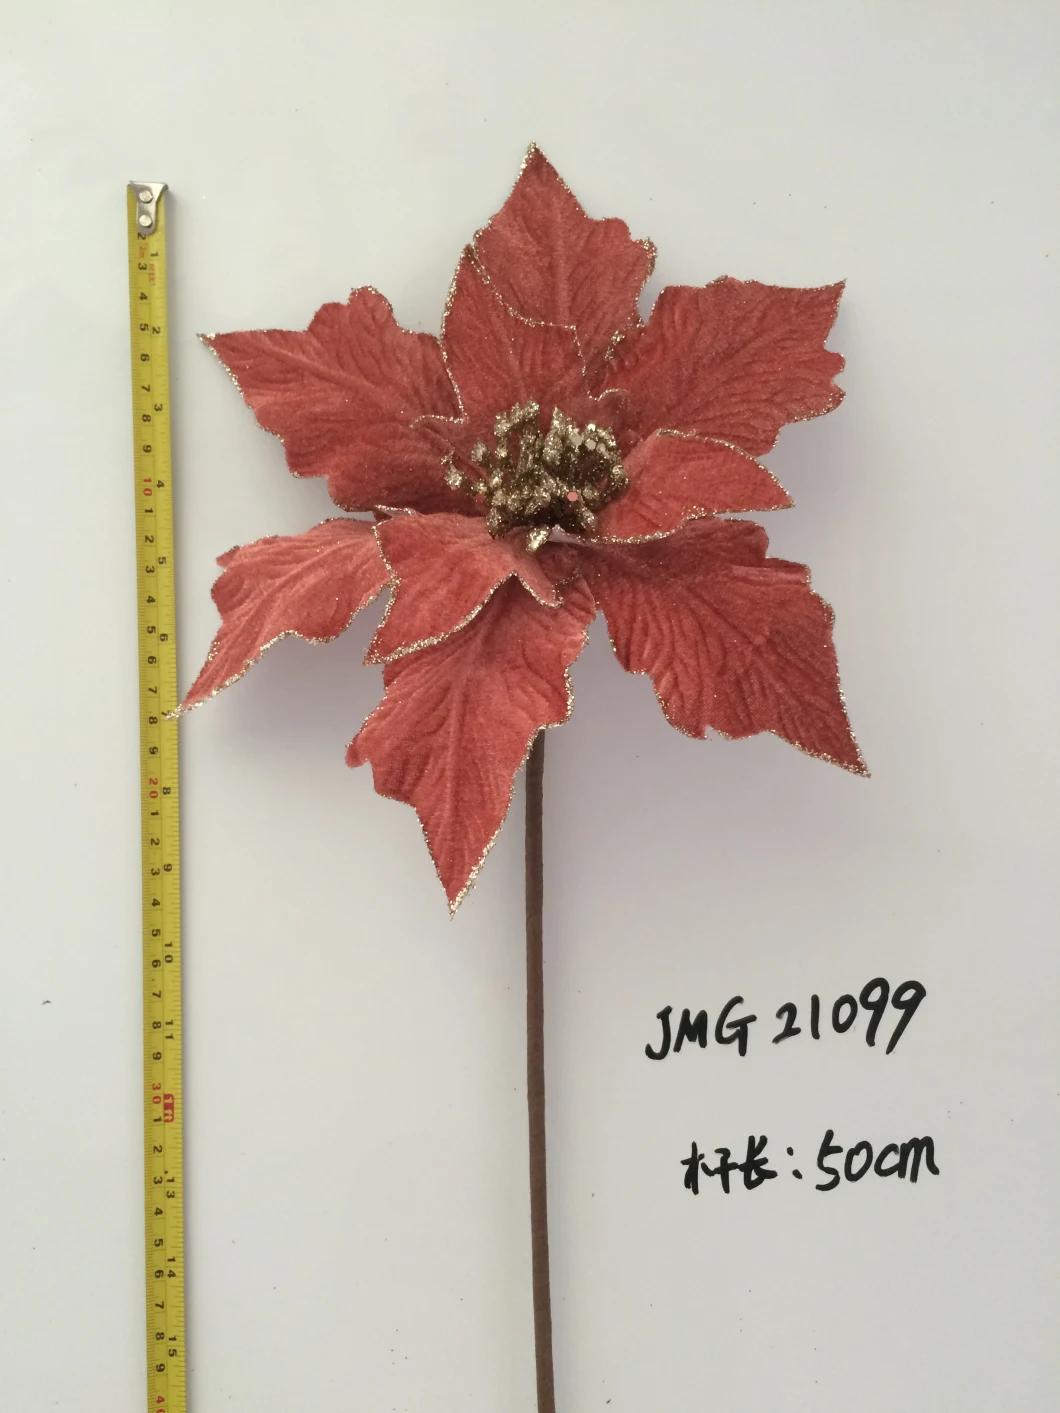 Ytcf099 Pink Color 26cm Poinsettia Flower for Tree Decoration